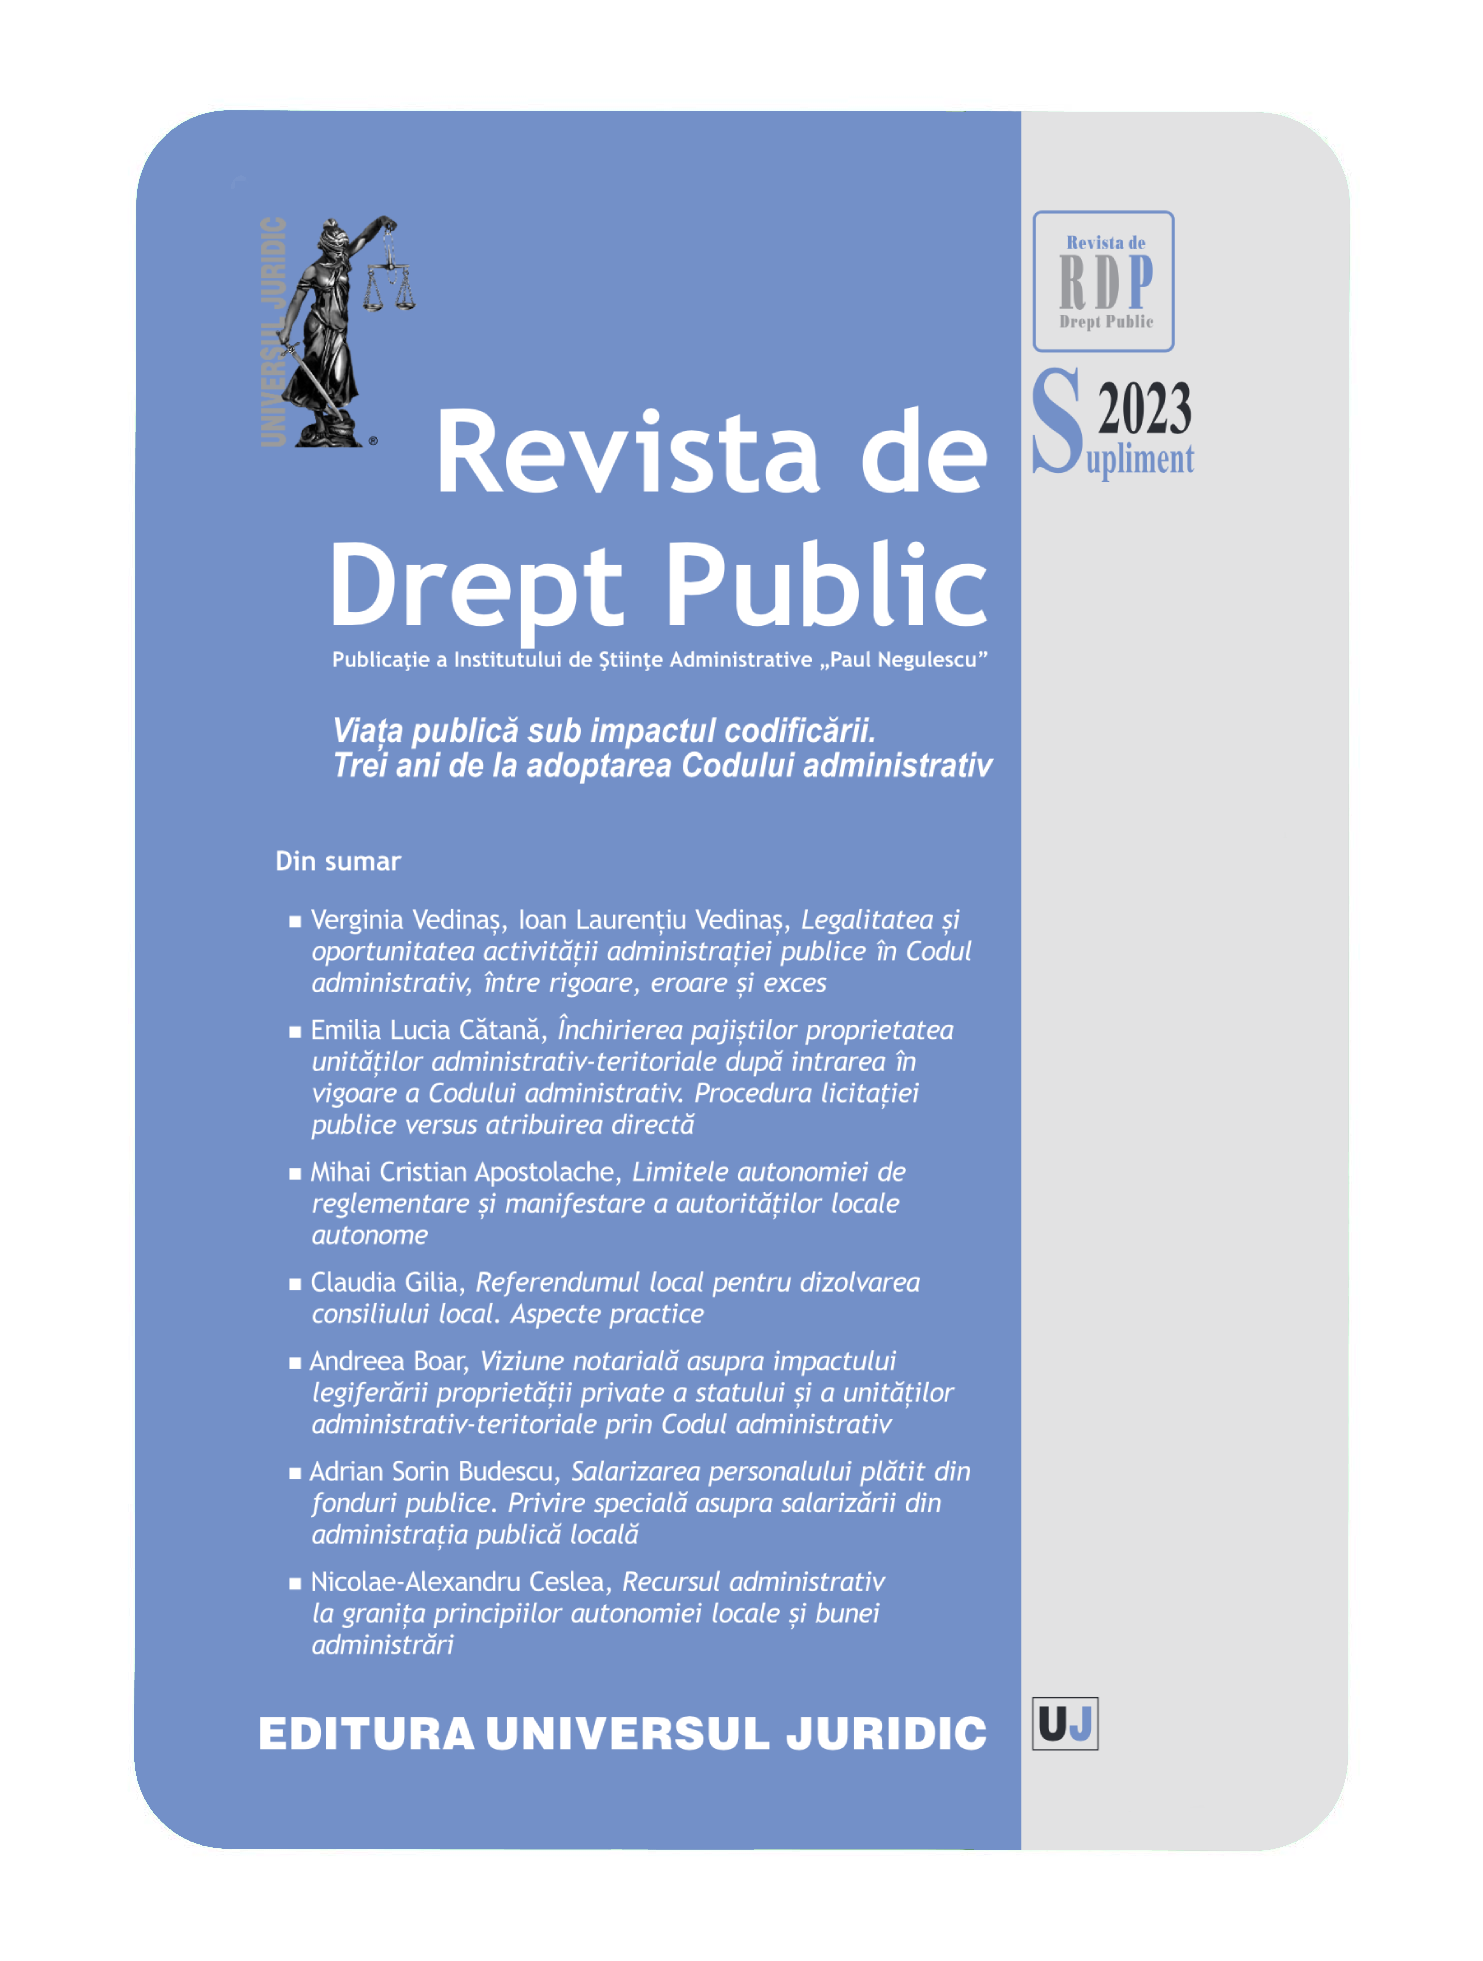 Notarial view on the impact of the legislation on private property of the state and administrative-territorial units through the Administrative Code Cover Image